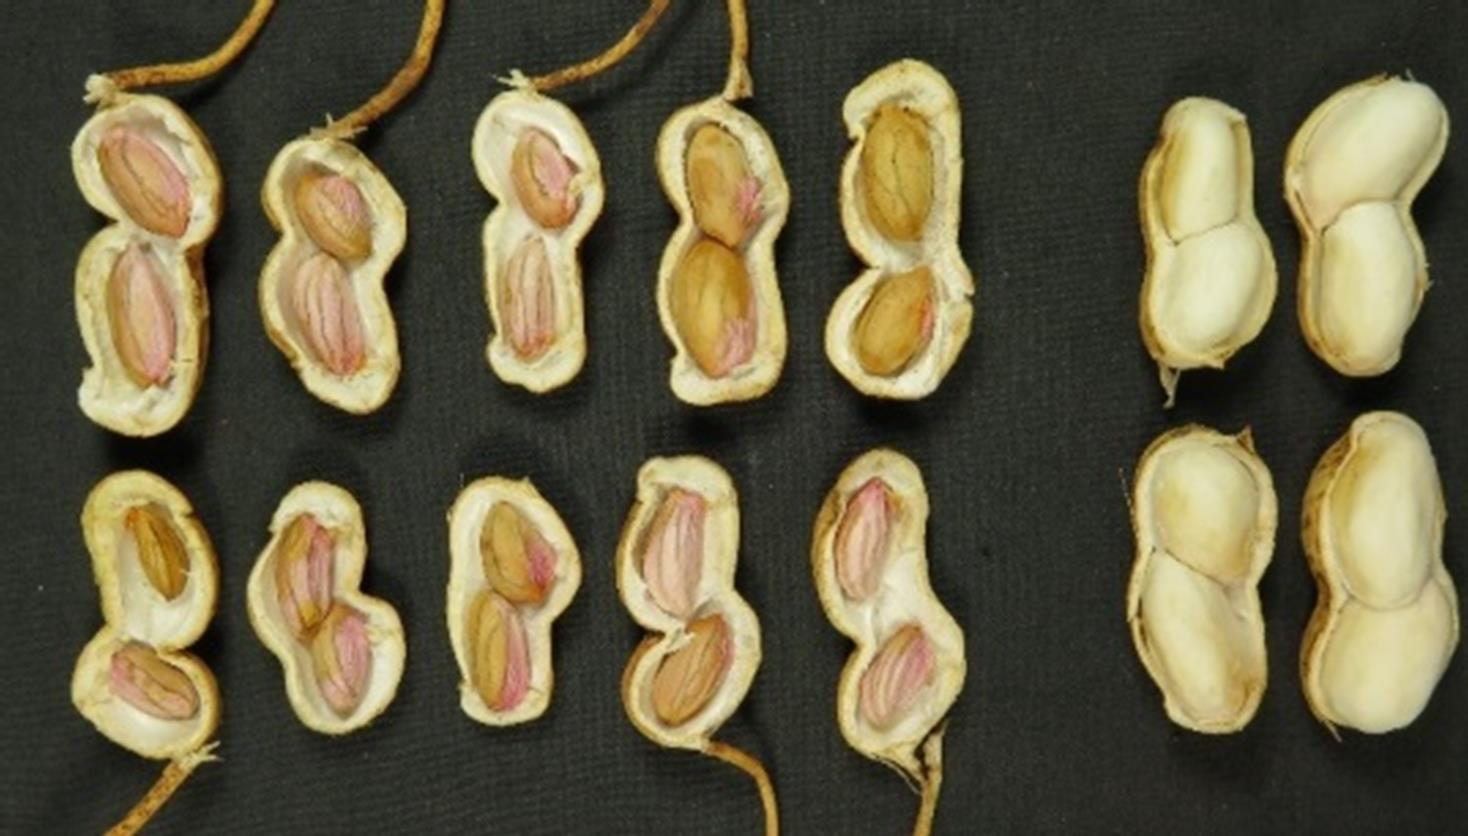 This is a photo of kernel symptoms on phytoplasma-infected peanuts on the left compared to healthy kernels on the right